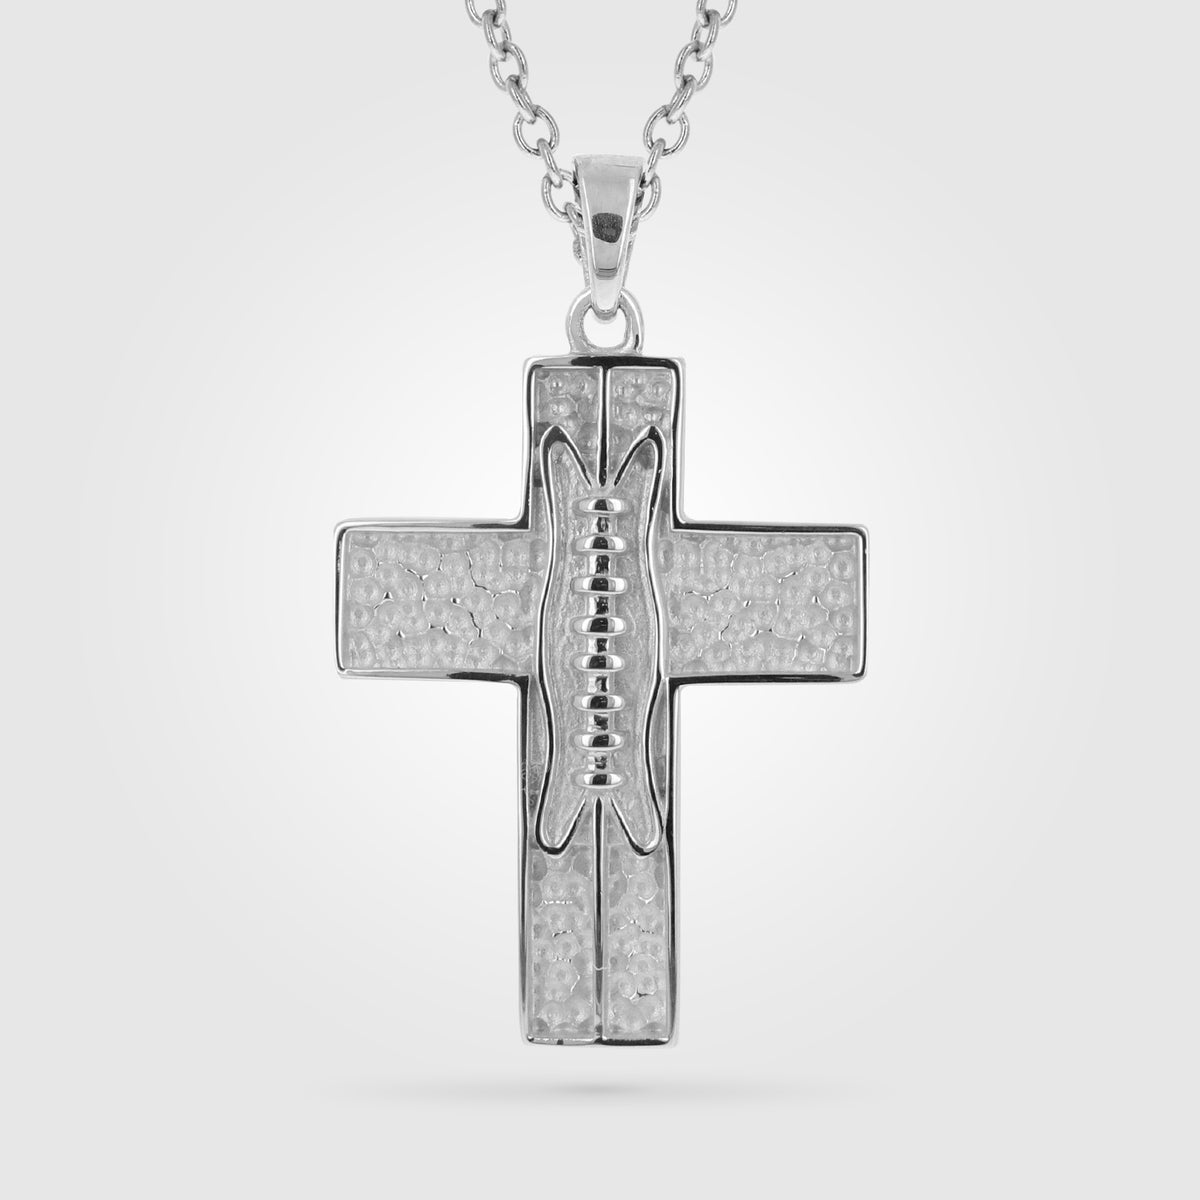 HZMAN Stainless Steel Basketball Football Cross Casual Sporty Men Pendant  Necklace Power Bible Verses Fashion Charm Jewelry Gift